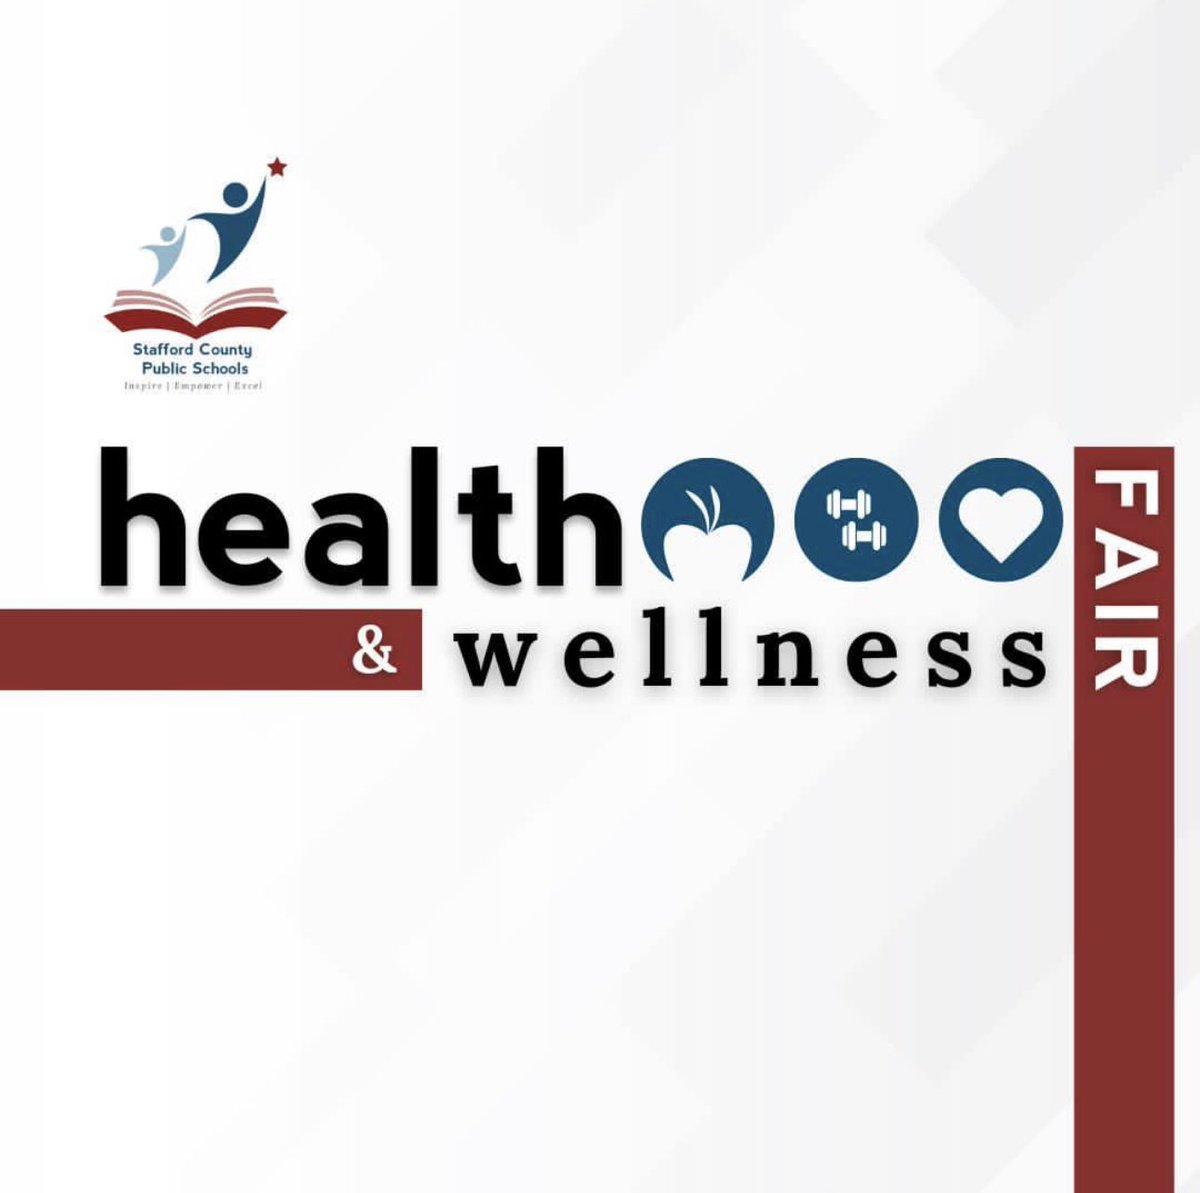 The Stafford Community Health and Wellness Fair is Today, Saturday, April 22nd, 2023 at Colonial Forge High School from 11:00 a.m. to 2:00 p.m. The Stafford community, school staff, students, and families are invited to attend this FREE event. #StaffordCommunity #StaffordSchools